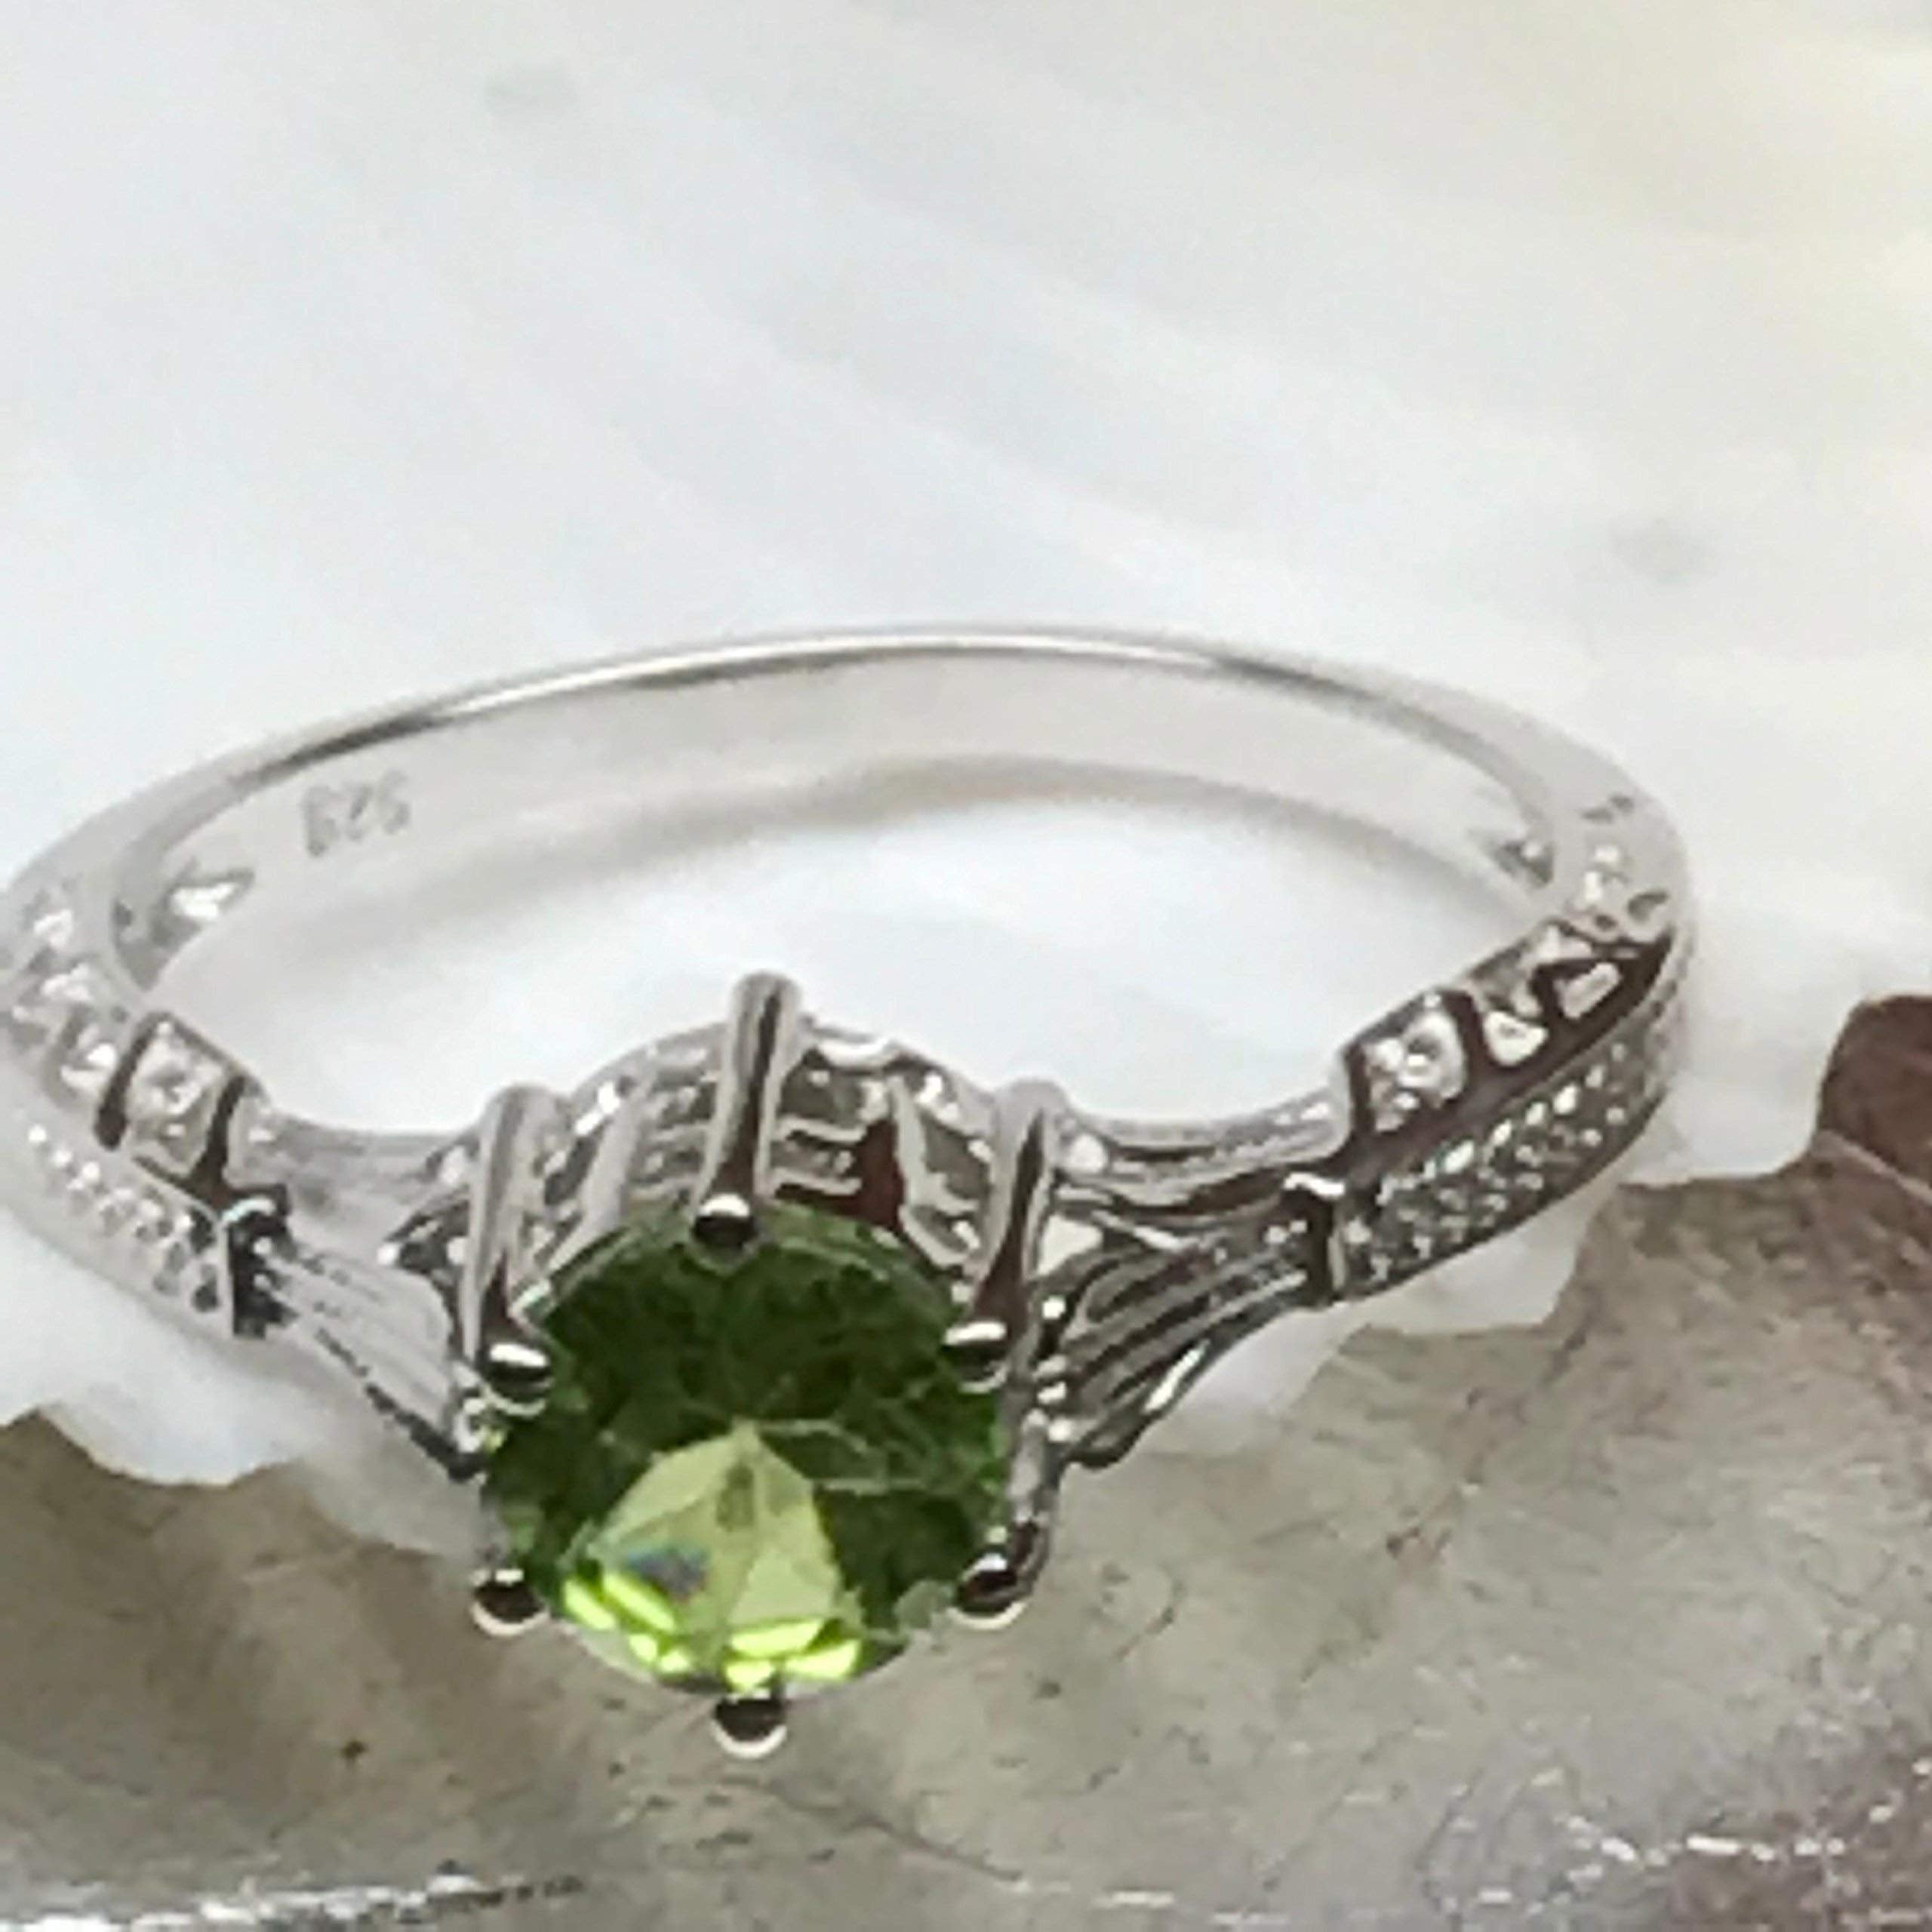 Genuine 1ct Green Peridot 925 Solid Sterling Silver Engagement Ring Size 5, 6, 7, 8, 9 - Natural Rocks by Kala